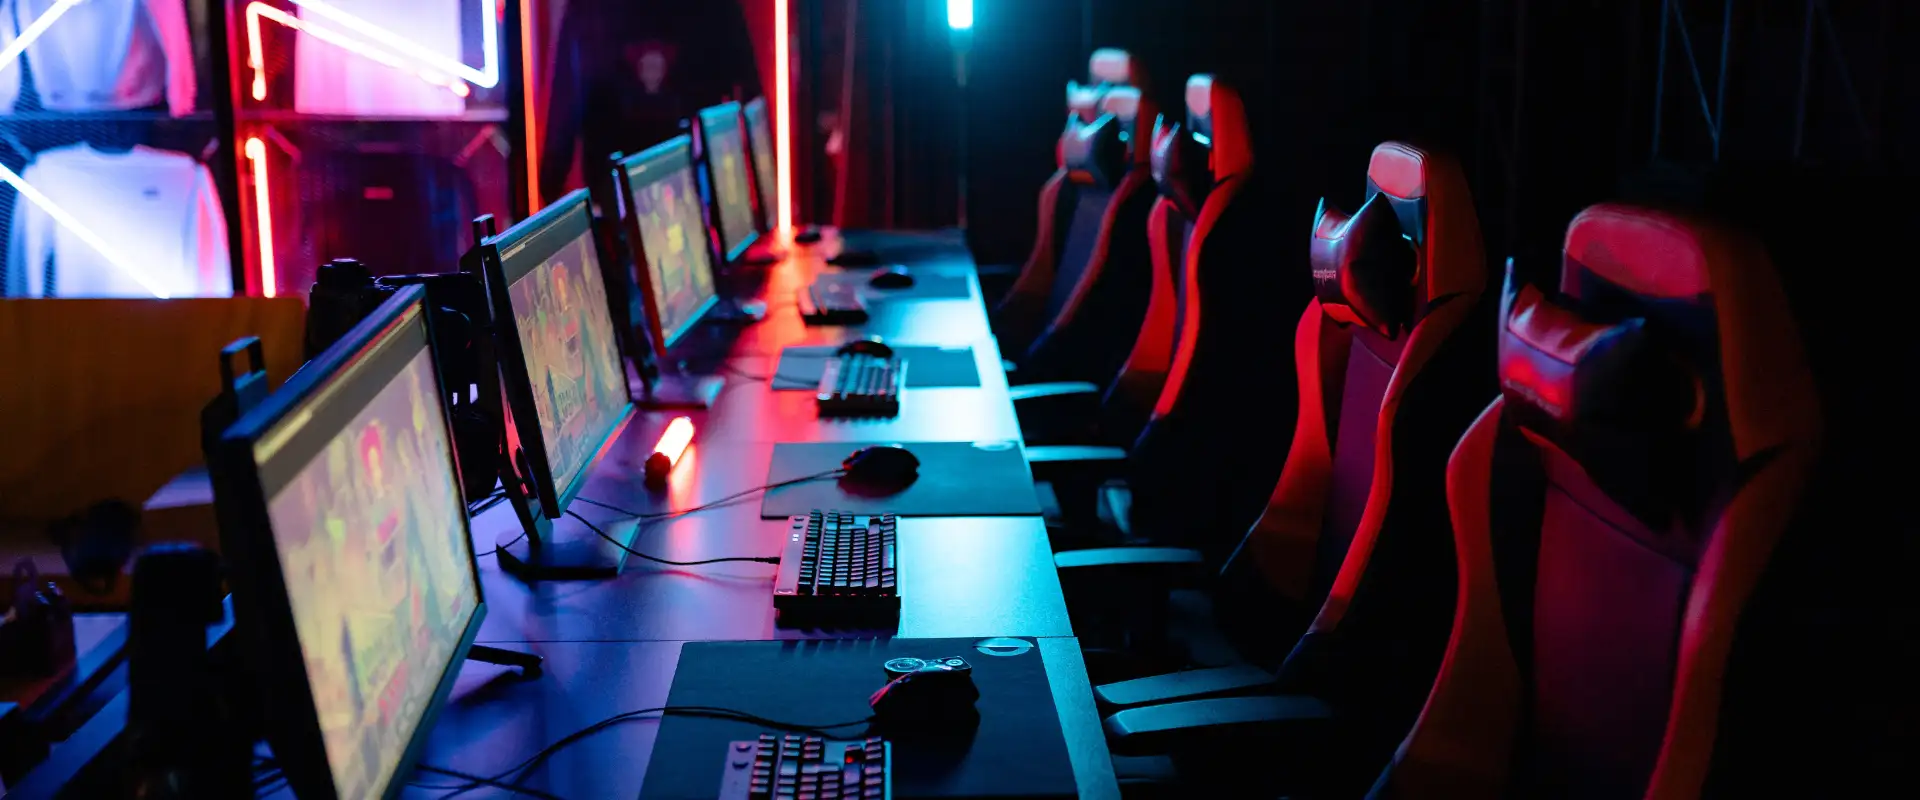 A row of desktop computers in a neon-lit gaming environment